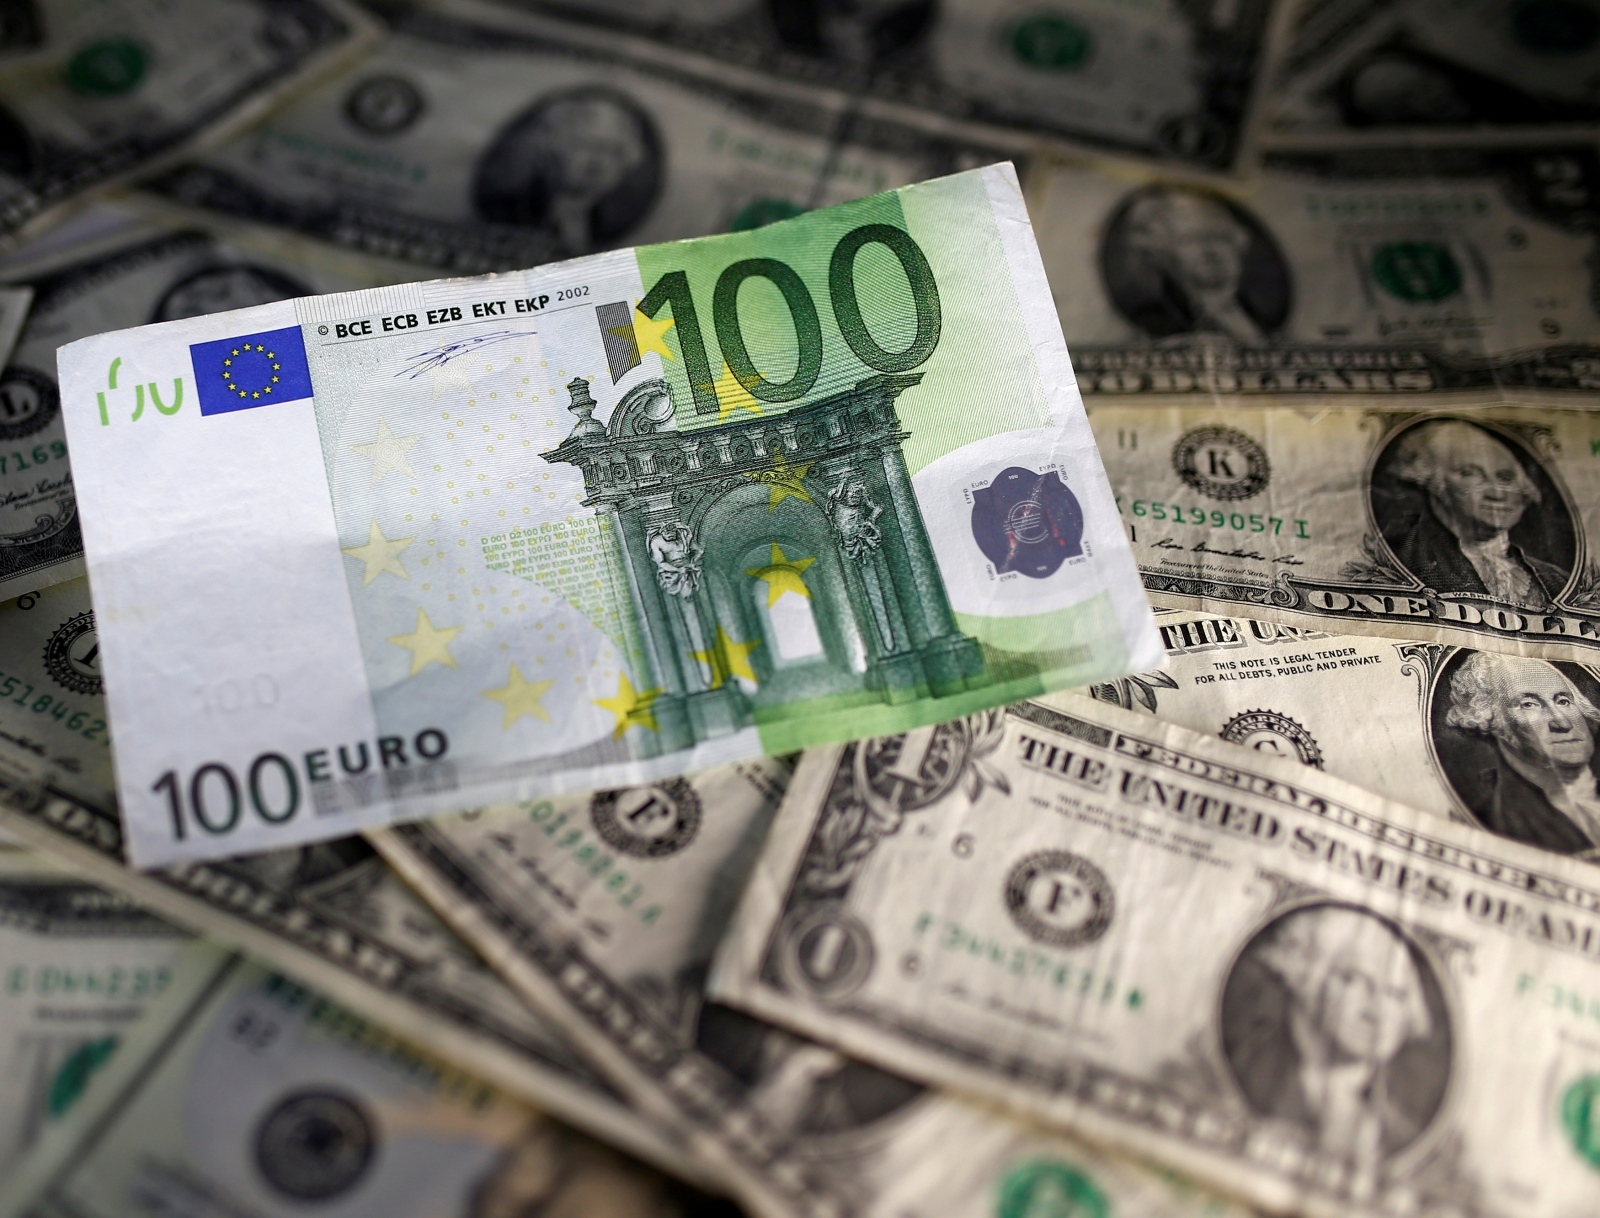 FILE PHOTO - U.S. dollar and Euro notes are seen in this picture illustration FILE PHOTO - U.S. dollar and Euro notes are seen in this November 7, 2016 picture illustration. REUTERS/Dado Ruvic/Illustration/File photo DADO RUVIC